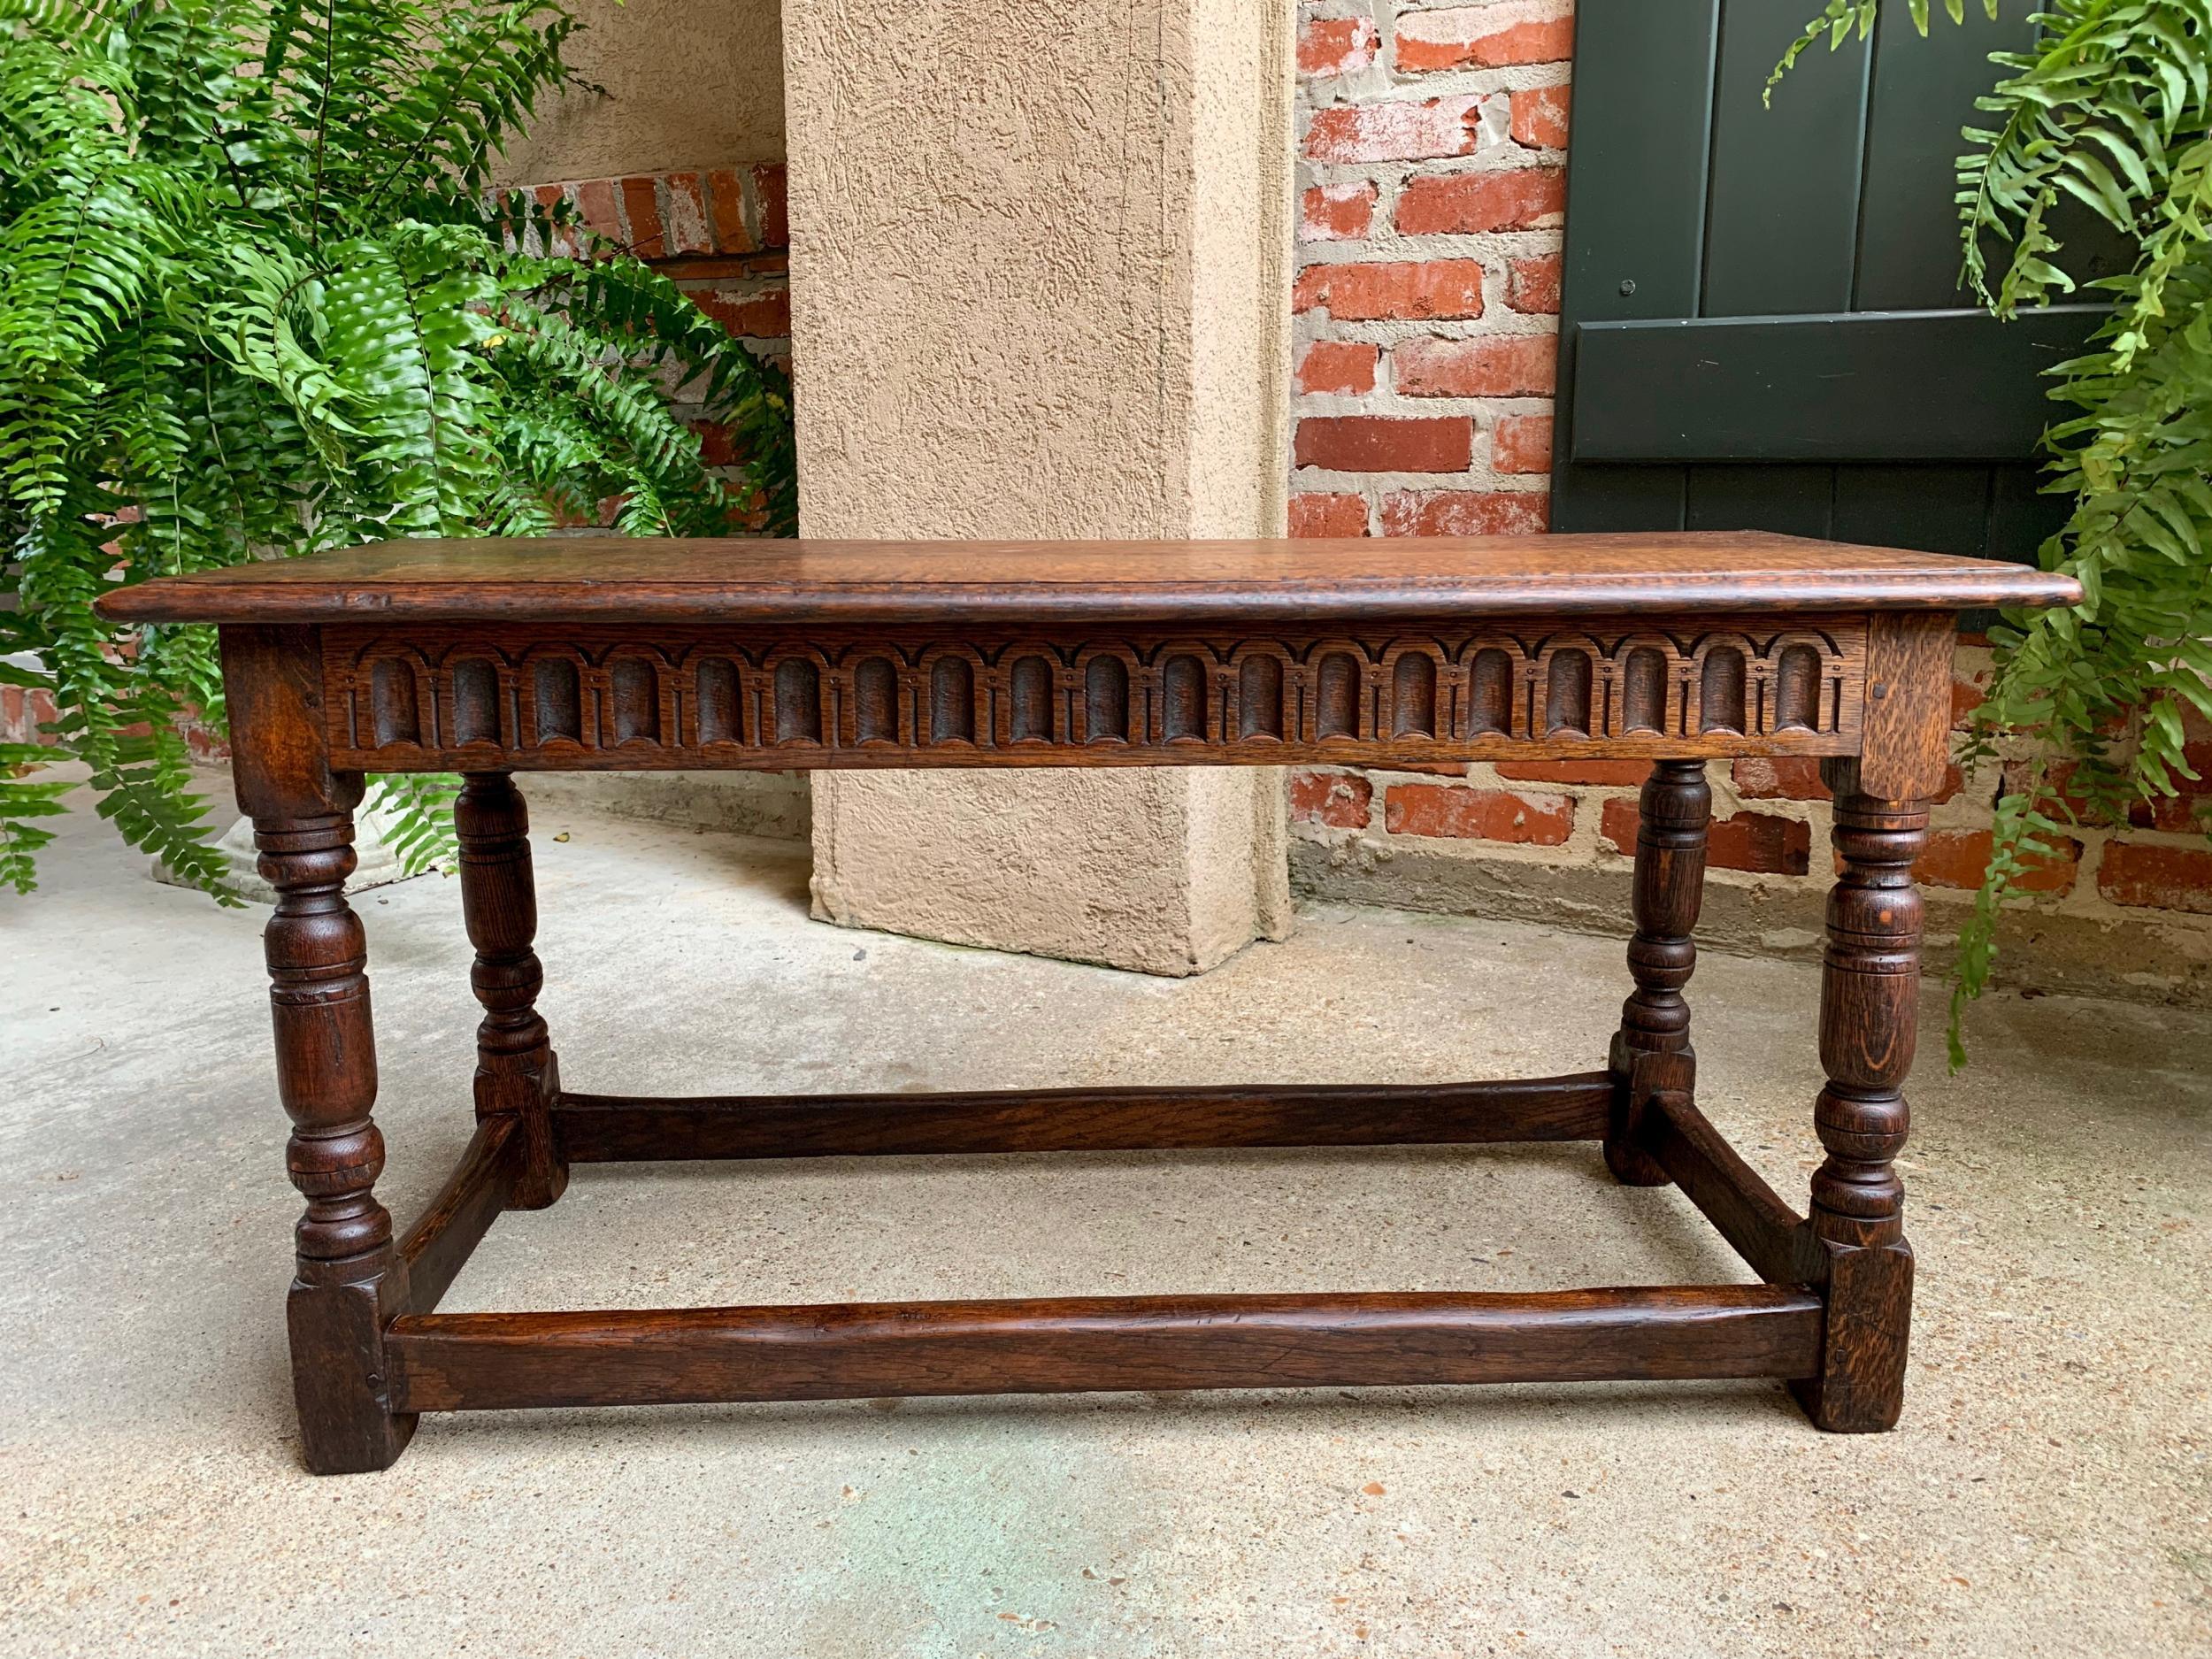 Antique English Carved Oak Pegged Joint Stool Duet Bench Window Seat, c1900 7